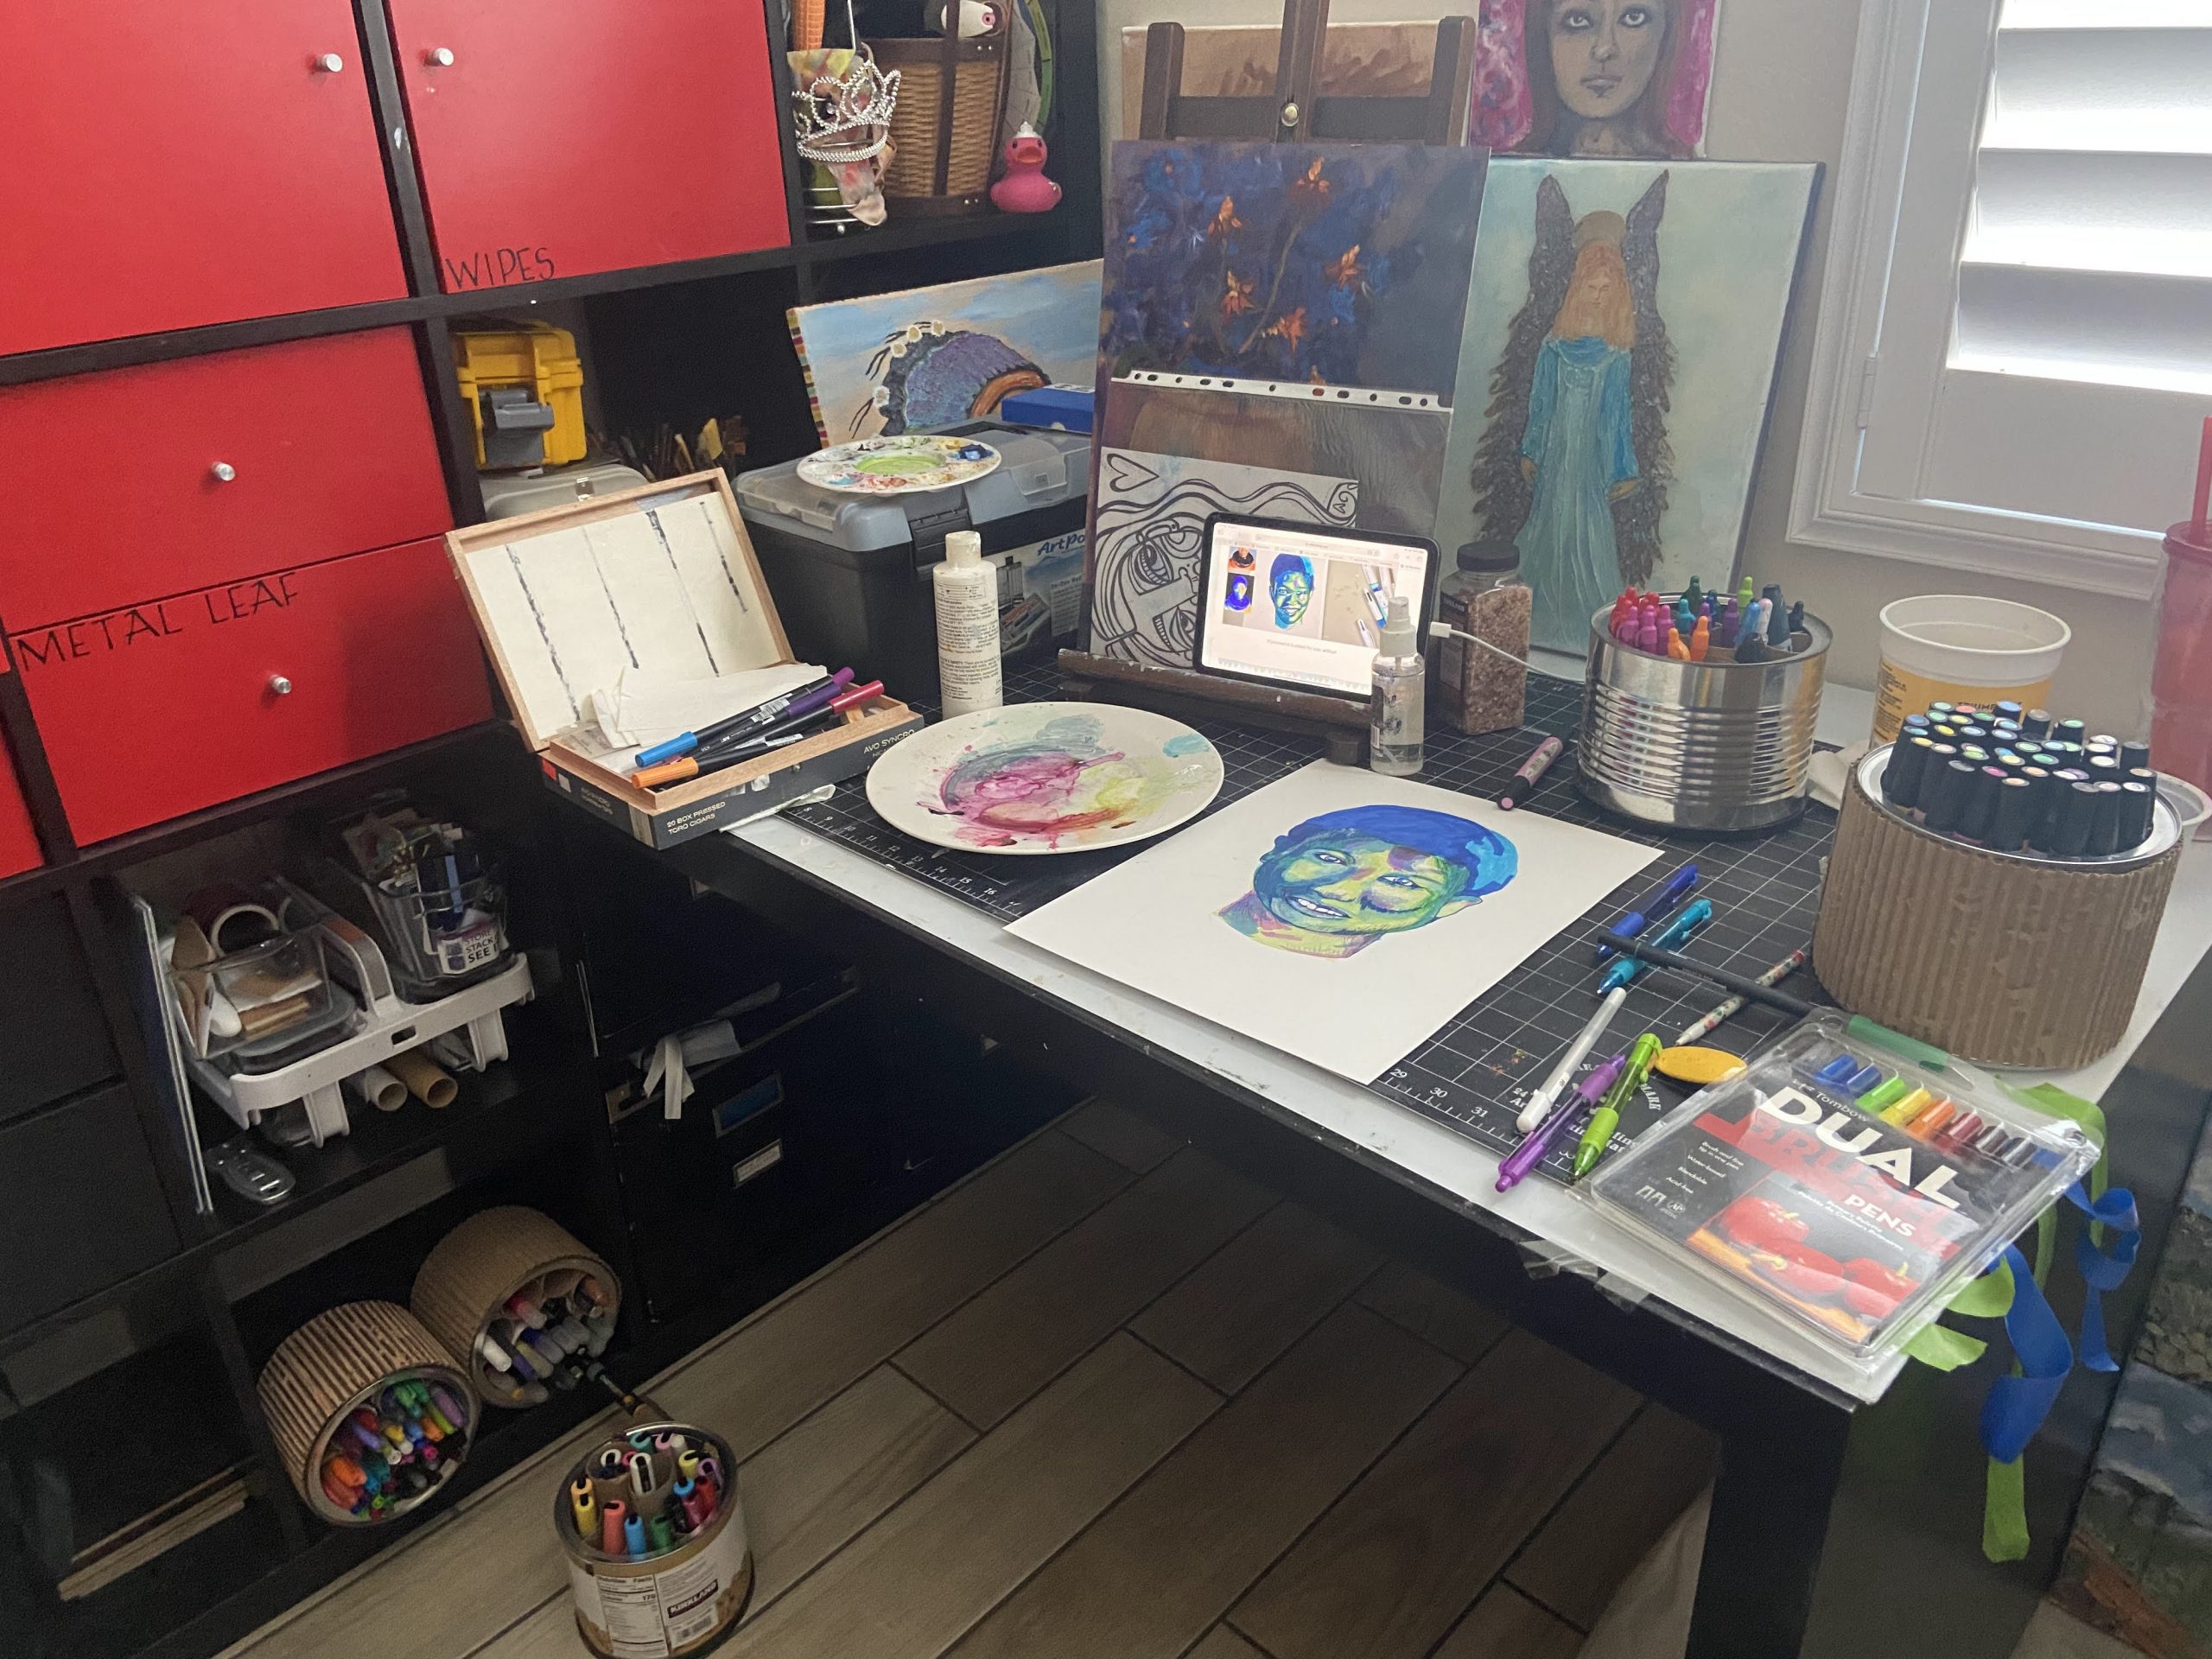 Art studio strewn about with works in progress and art supplies.